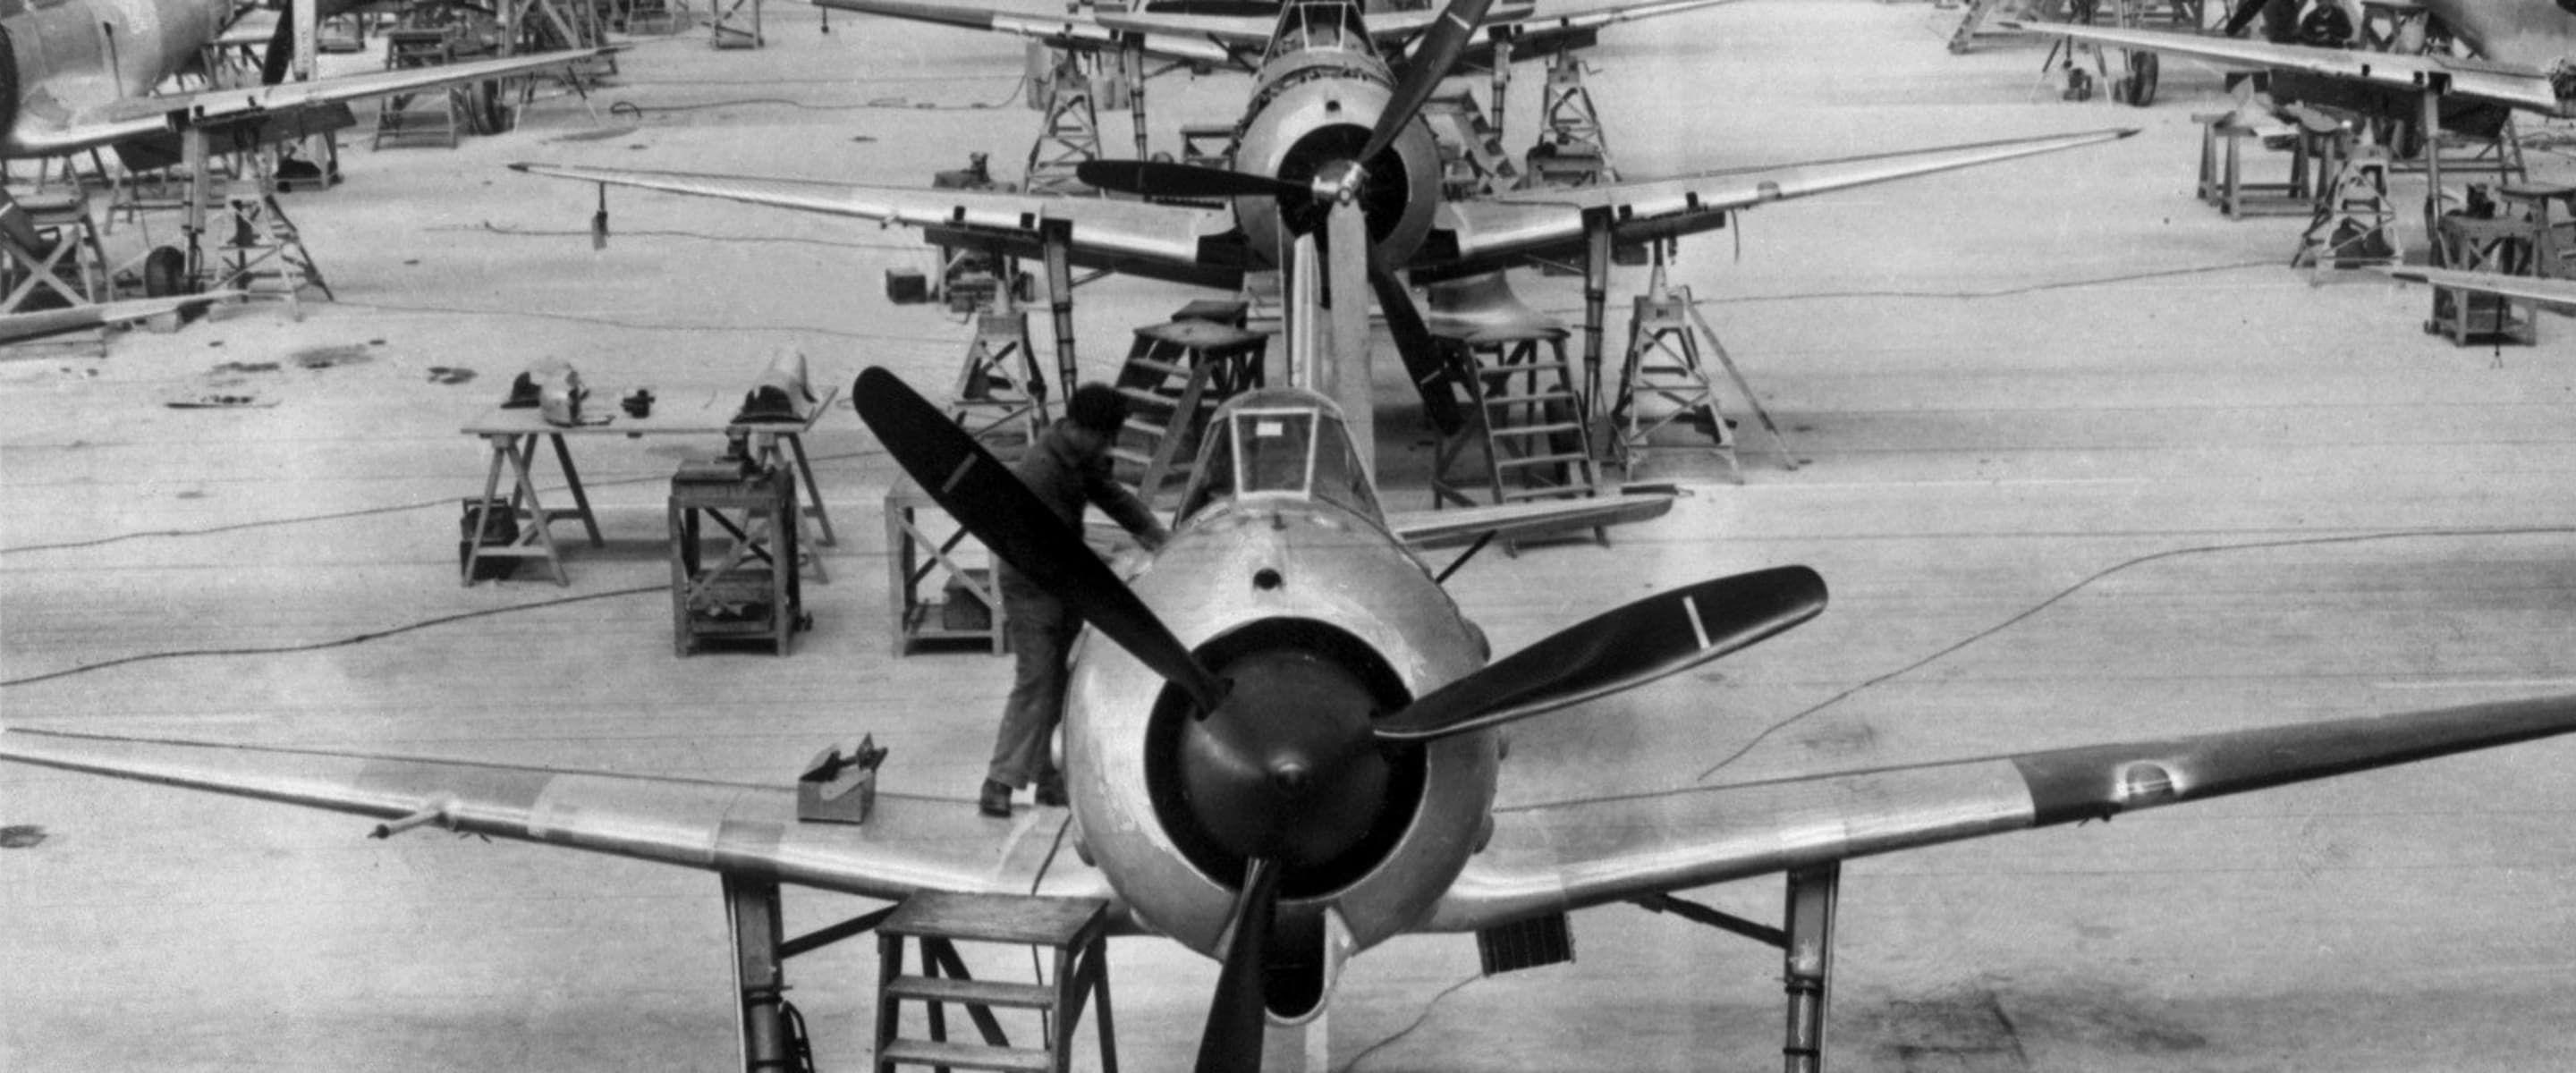 Sheet metal workers building parts of a Bloch MB-151/MB-152 fighter at the SNCASO factory in Châteauroux-Déols.